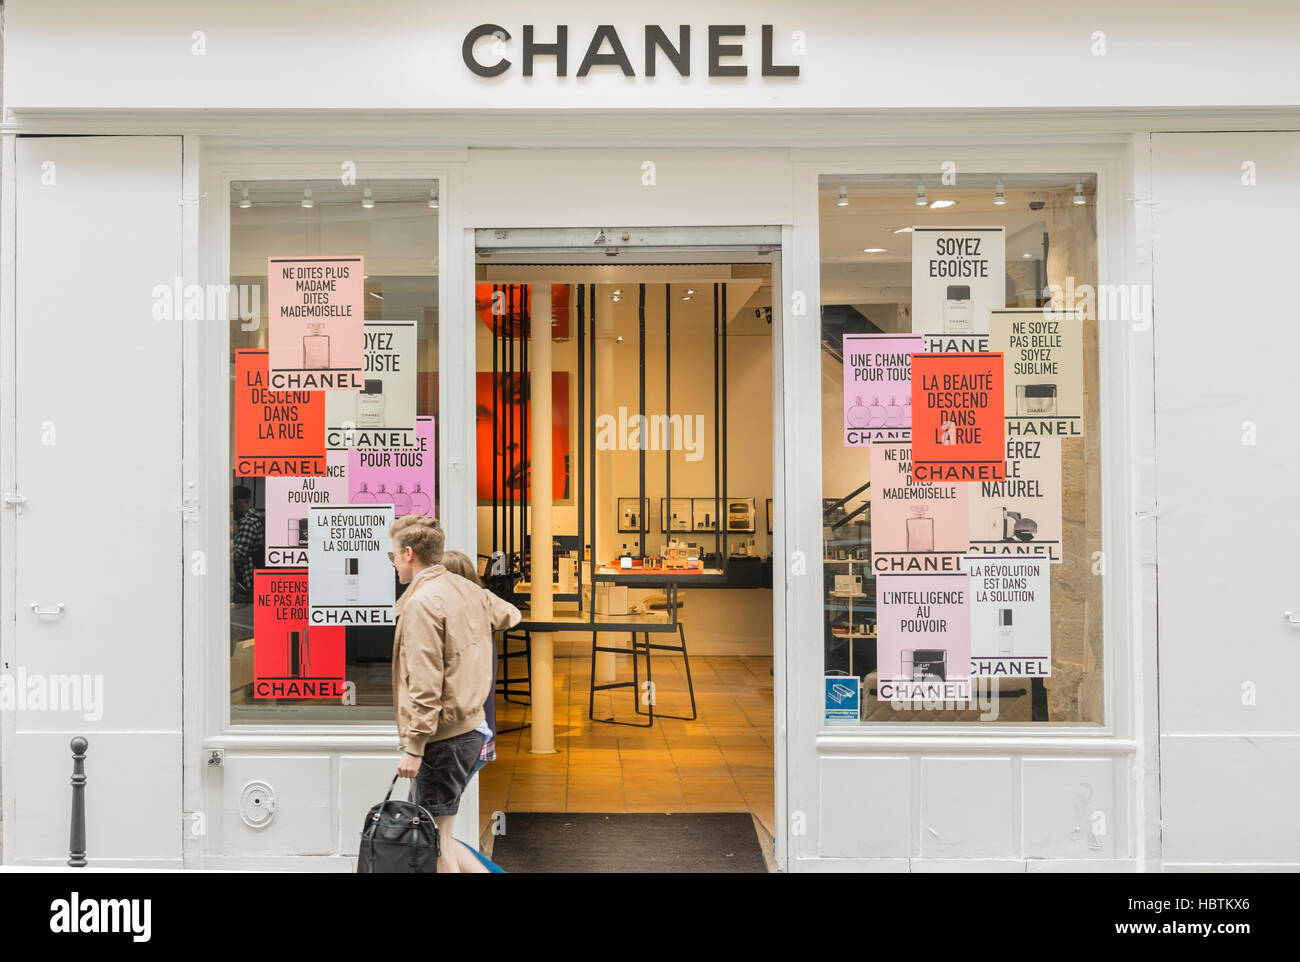 Chanel Boutique Paris High Resolution Stock Photography and Images - Alamy